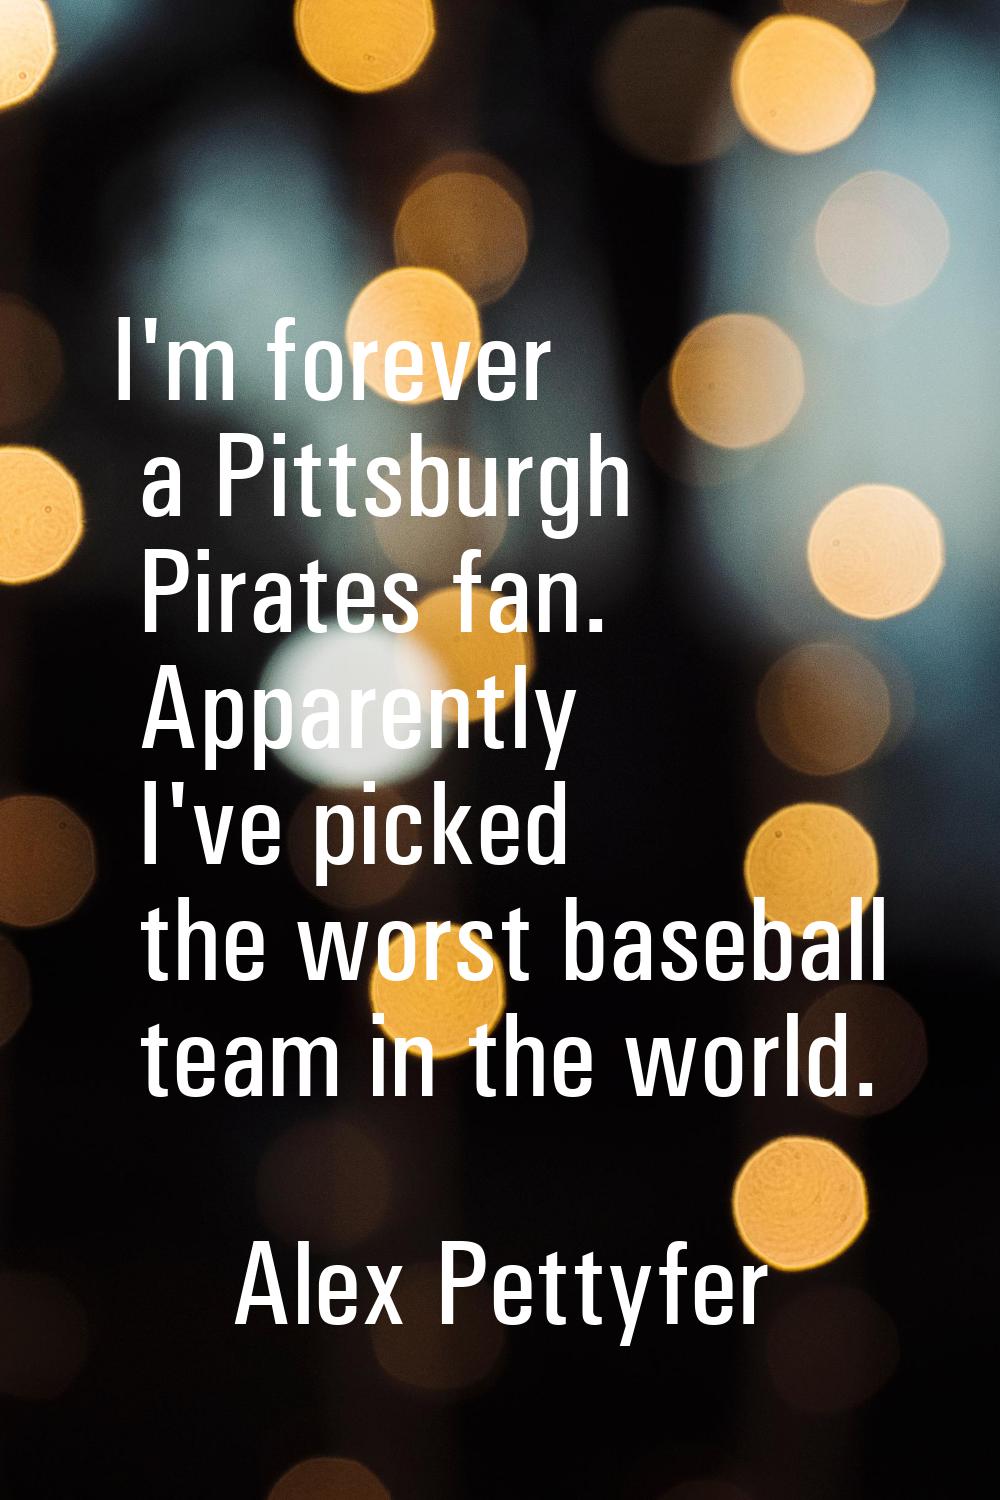 I'm forever a Pittsburgh Pirates fan. Apparently I've picked the worst baseball team in the world.